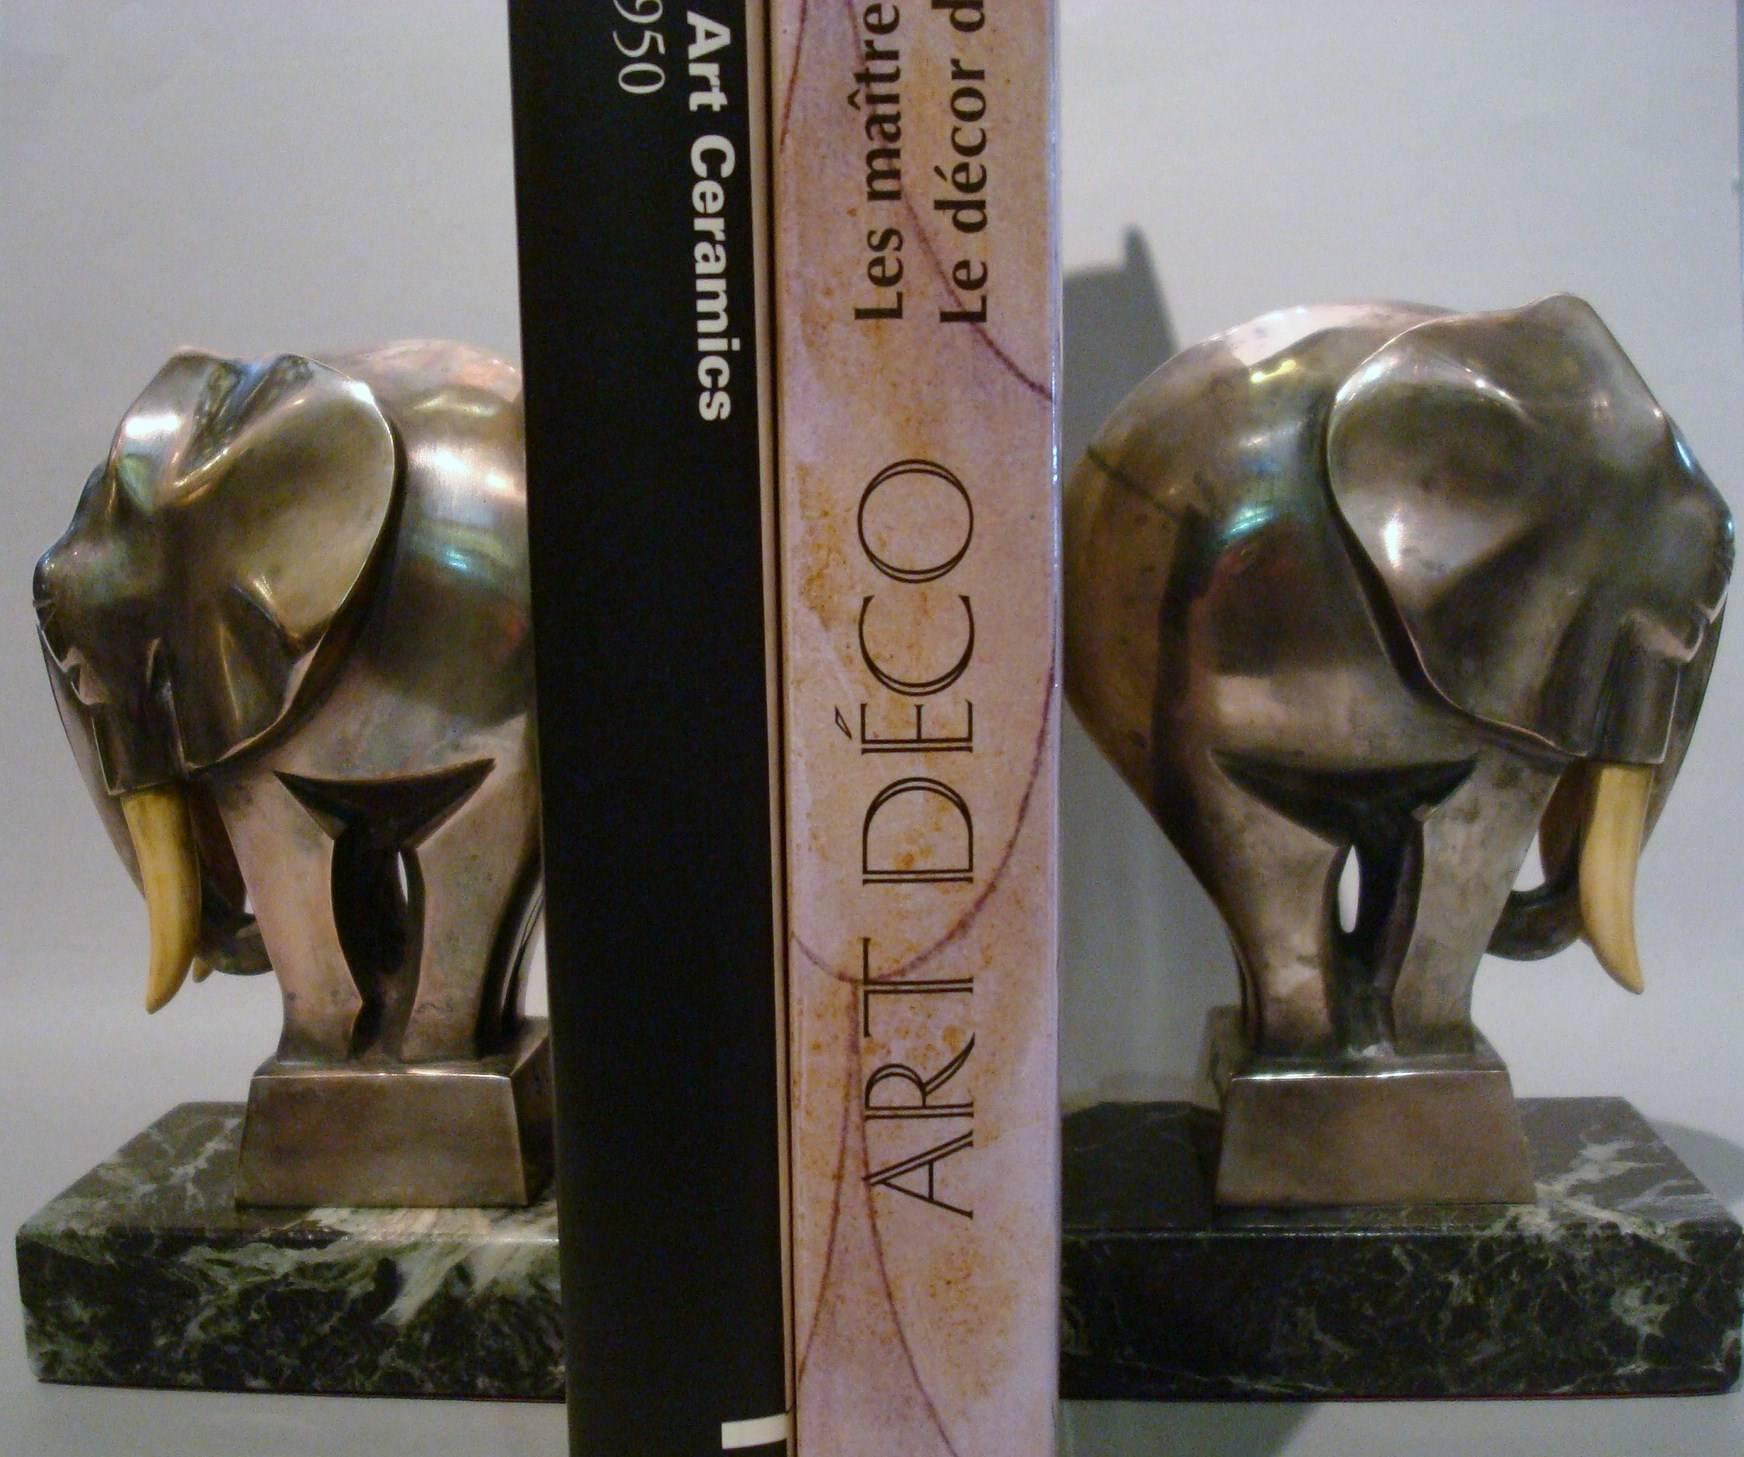 Fantastic Art Deco silvered bronze elephant bookends signed G. H. Laurent, France, 1920s. Perfect desk piece. Nice and heavy bronze bookends mounted over Italian green marble bases. Nice animal Sculpture. Some age wear on the plating.